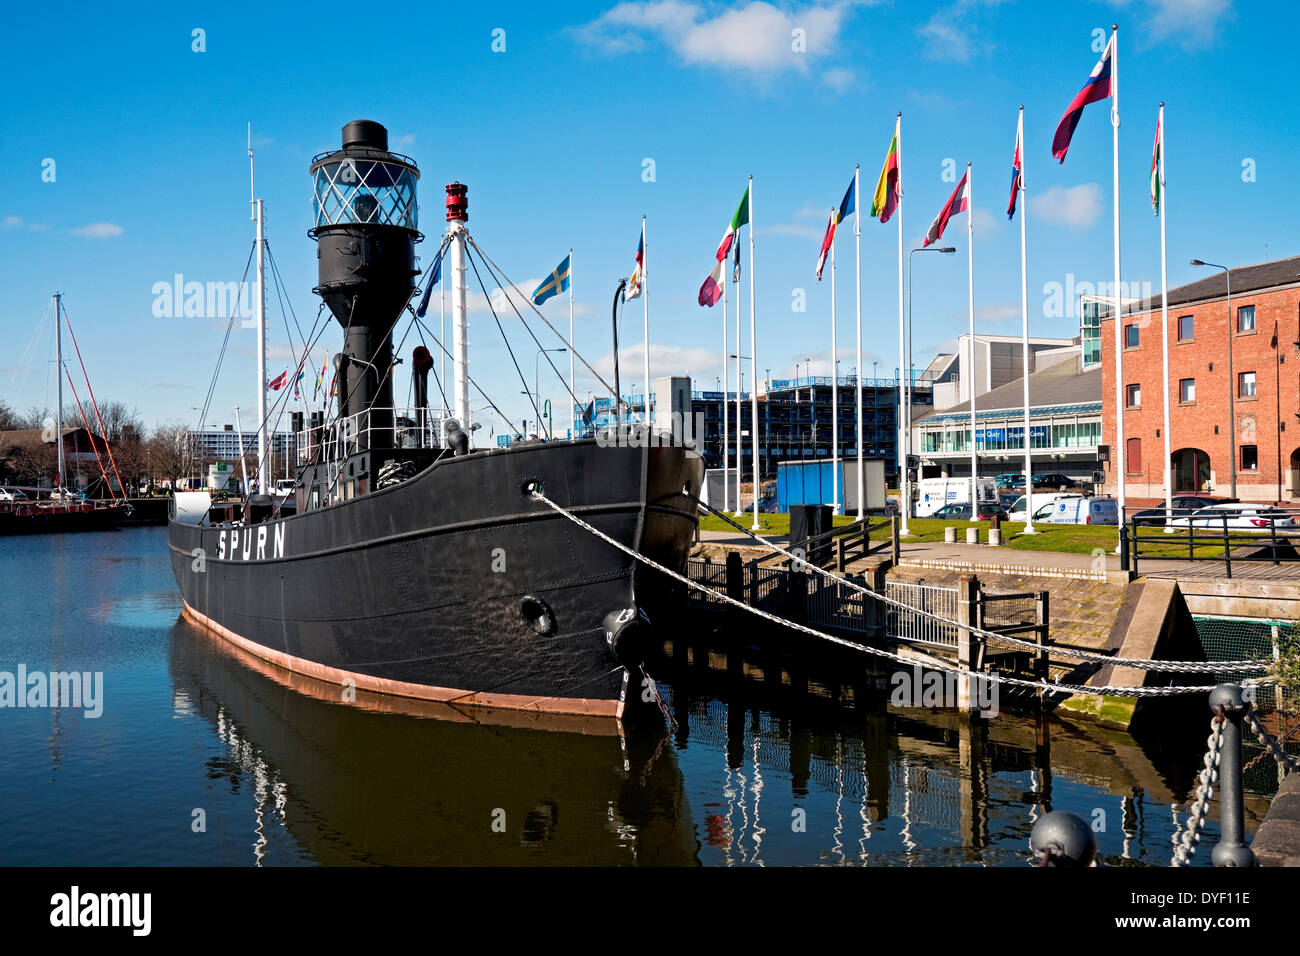 Spurn Lightship now a visitor attraction museum moored at the Marina Kingston upon Hull East Yorkshire England UK United Kingdom GB Great Britain Stock Photo